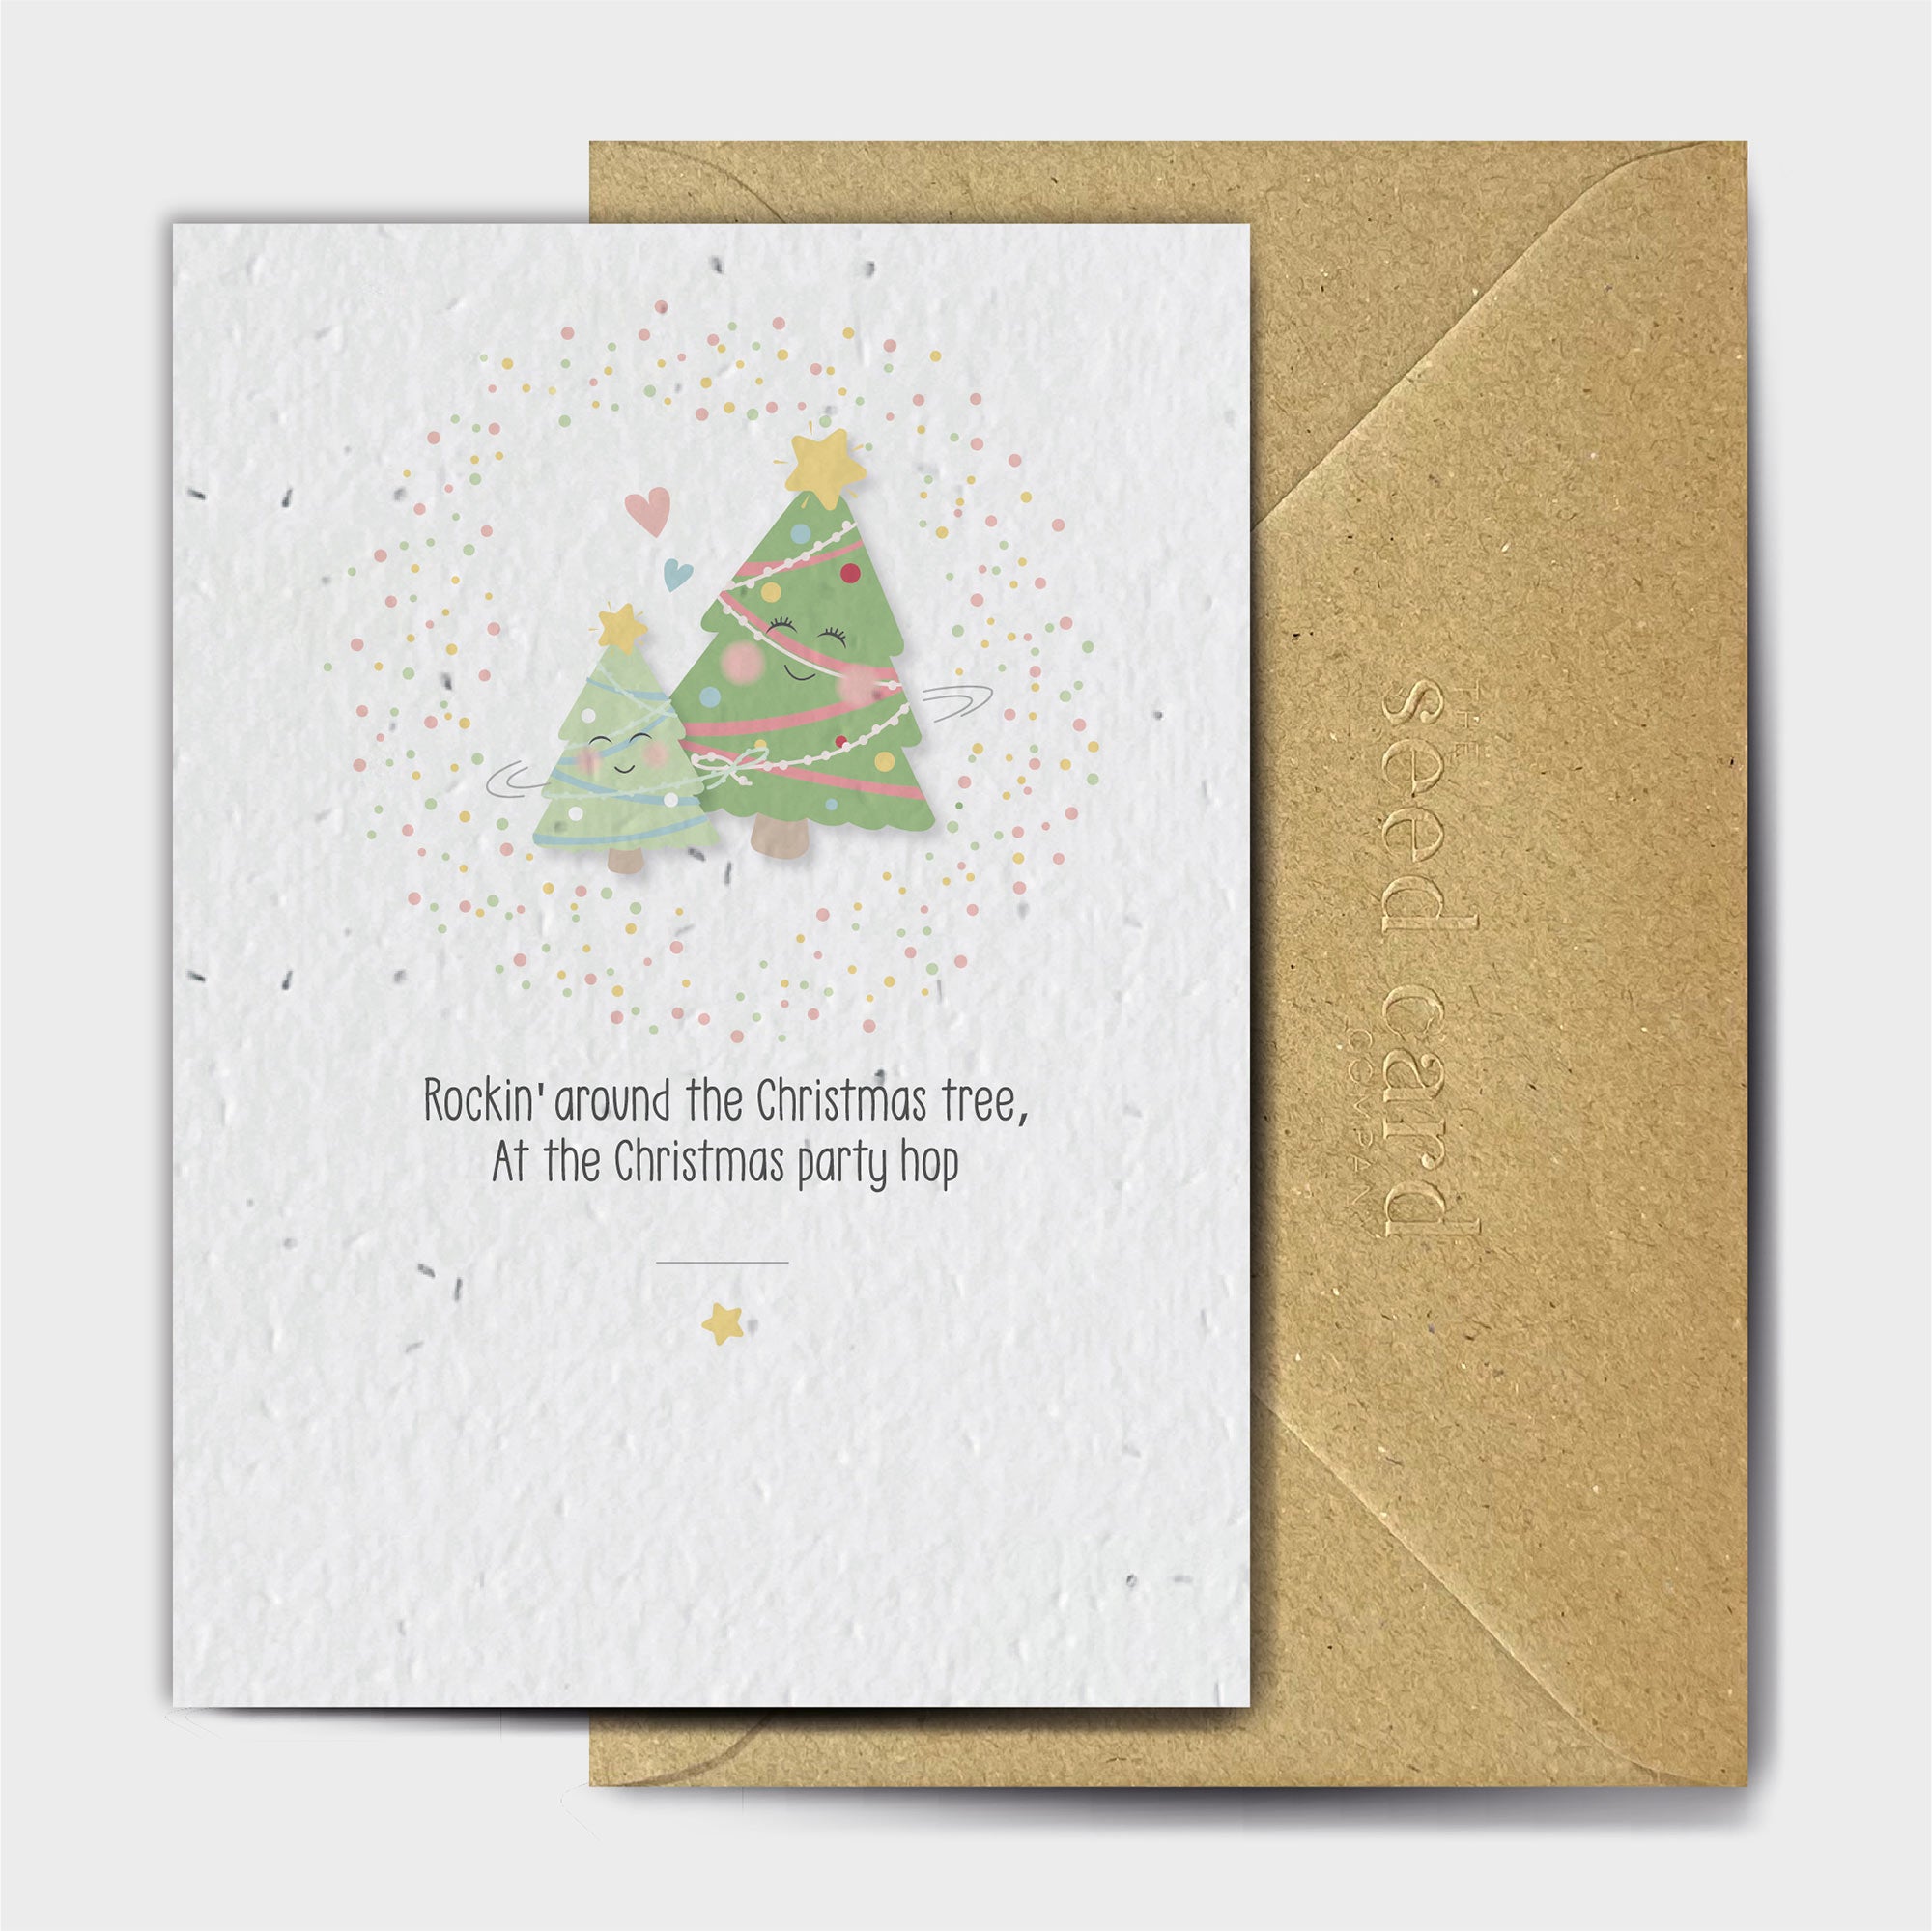 Shop online Let The Christmas Spirit Ring - 100% biodegradable seed-embedded cards Shop -The Seed Card Company